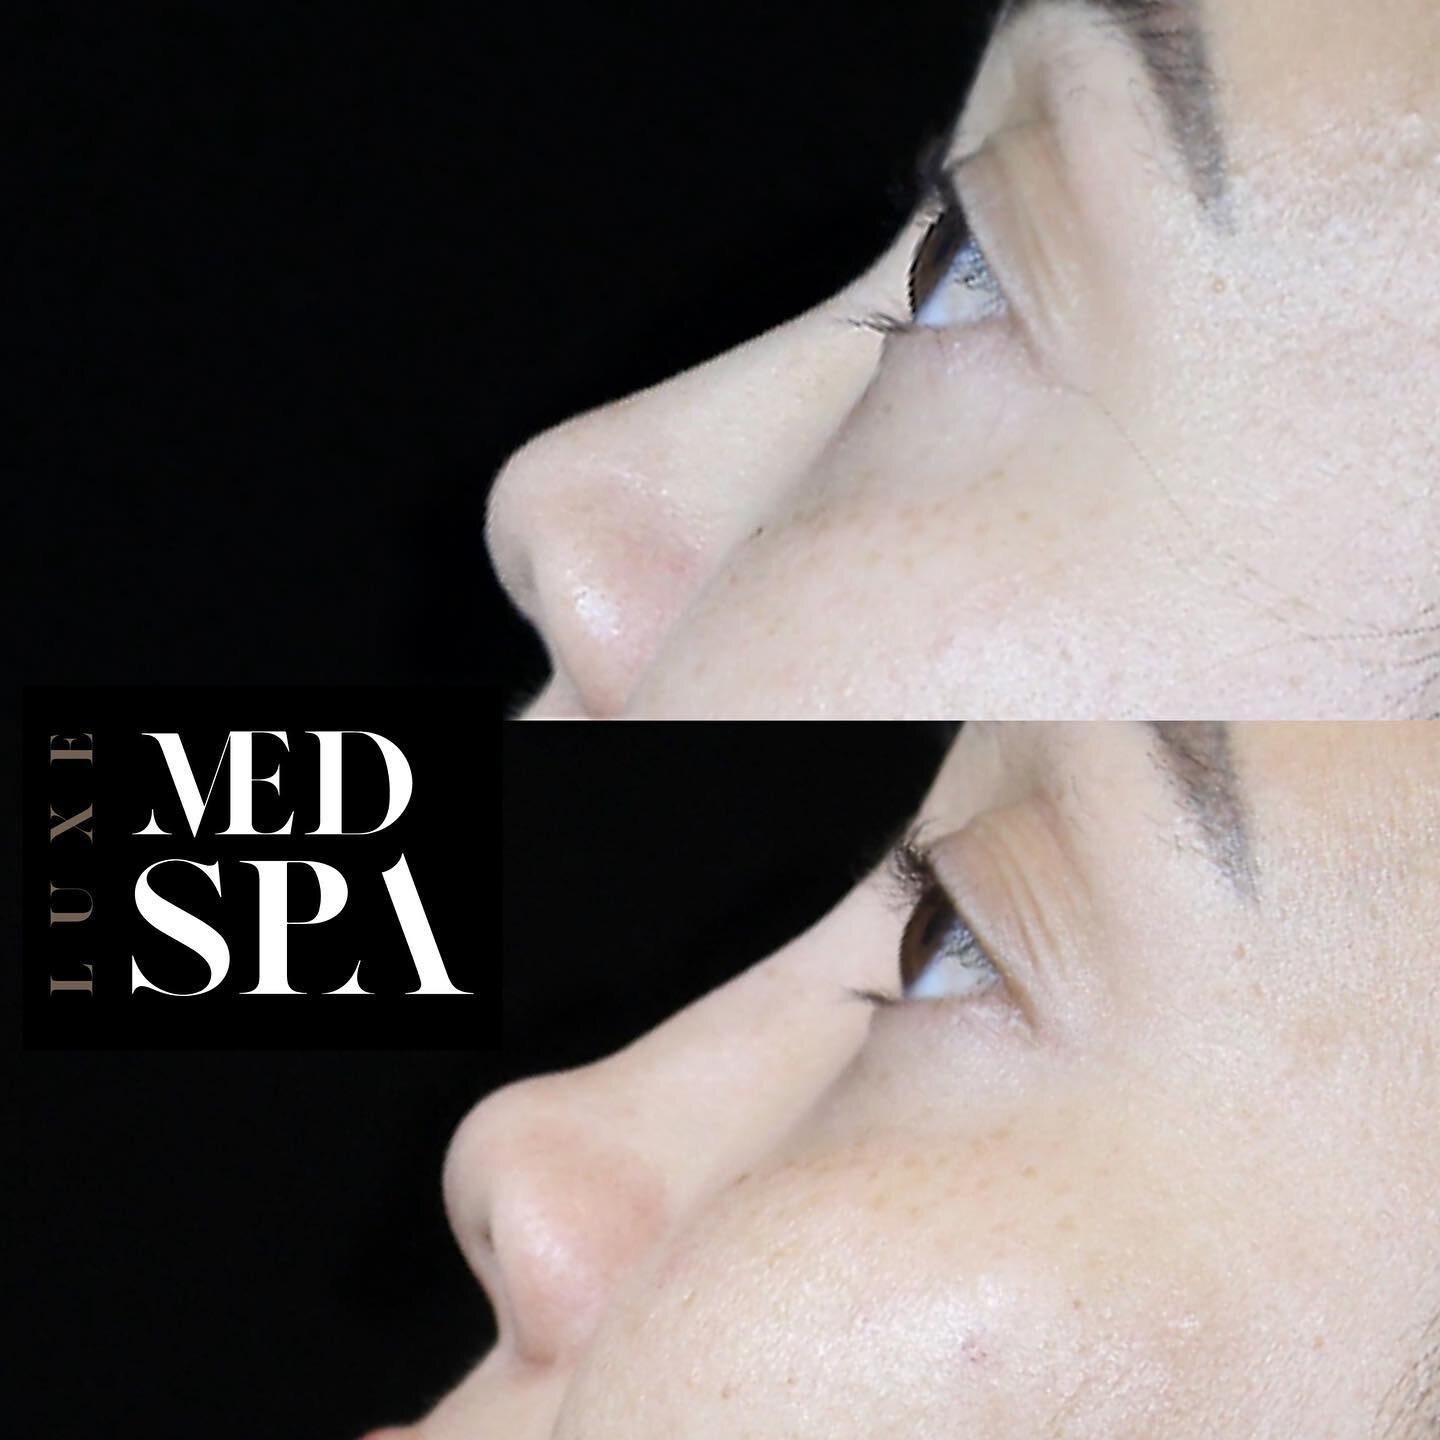 Are you unhappy with the shape or size of your nose? Do you want to enhance your facial features and boost your confidence? Look no further than Luxe Med Spa Aesthetics in downtown Orlando! Our liquid rhinoplasty procedure is the perfect solution for